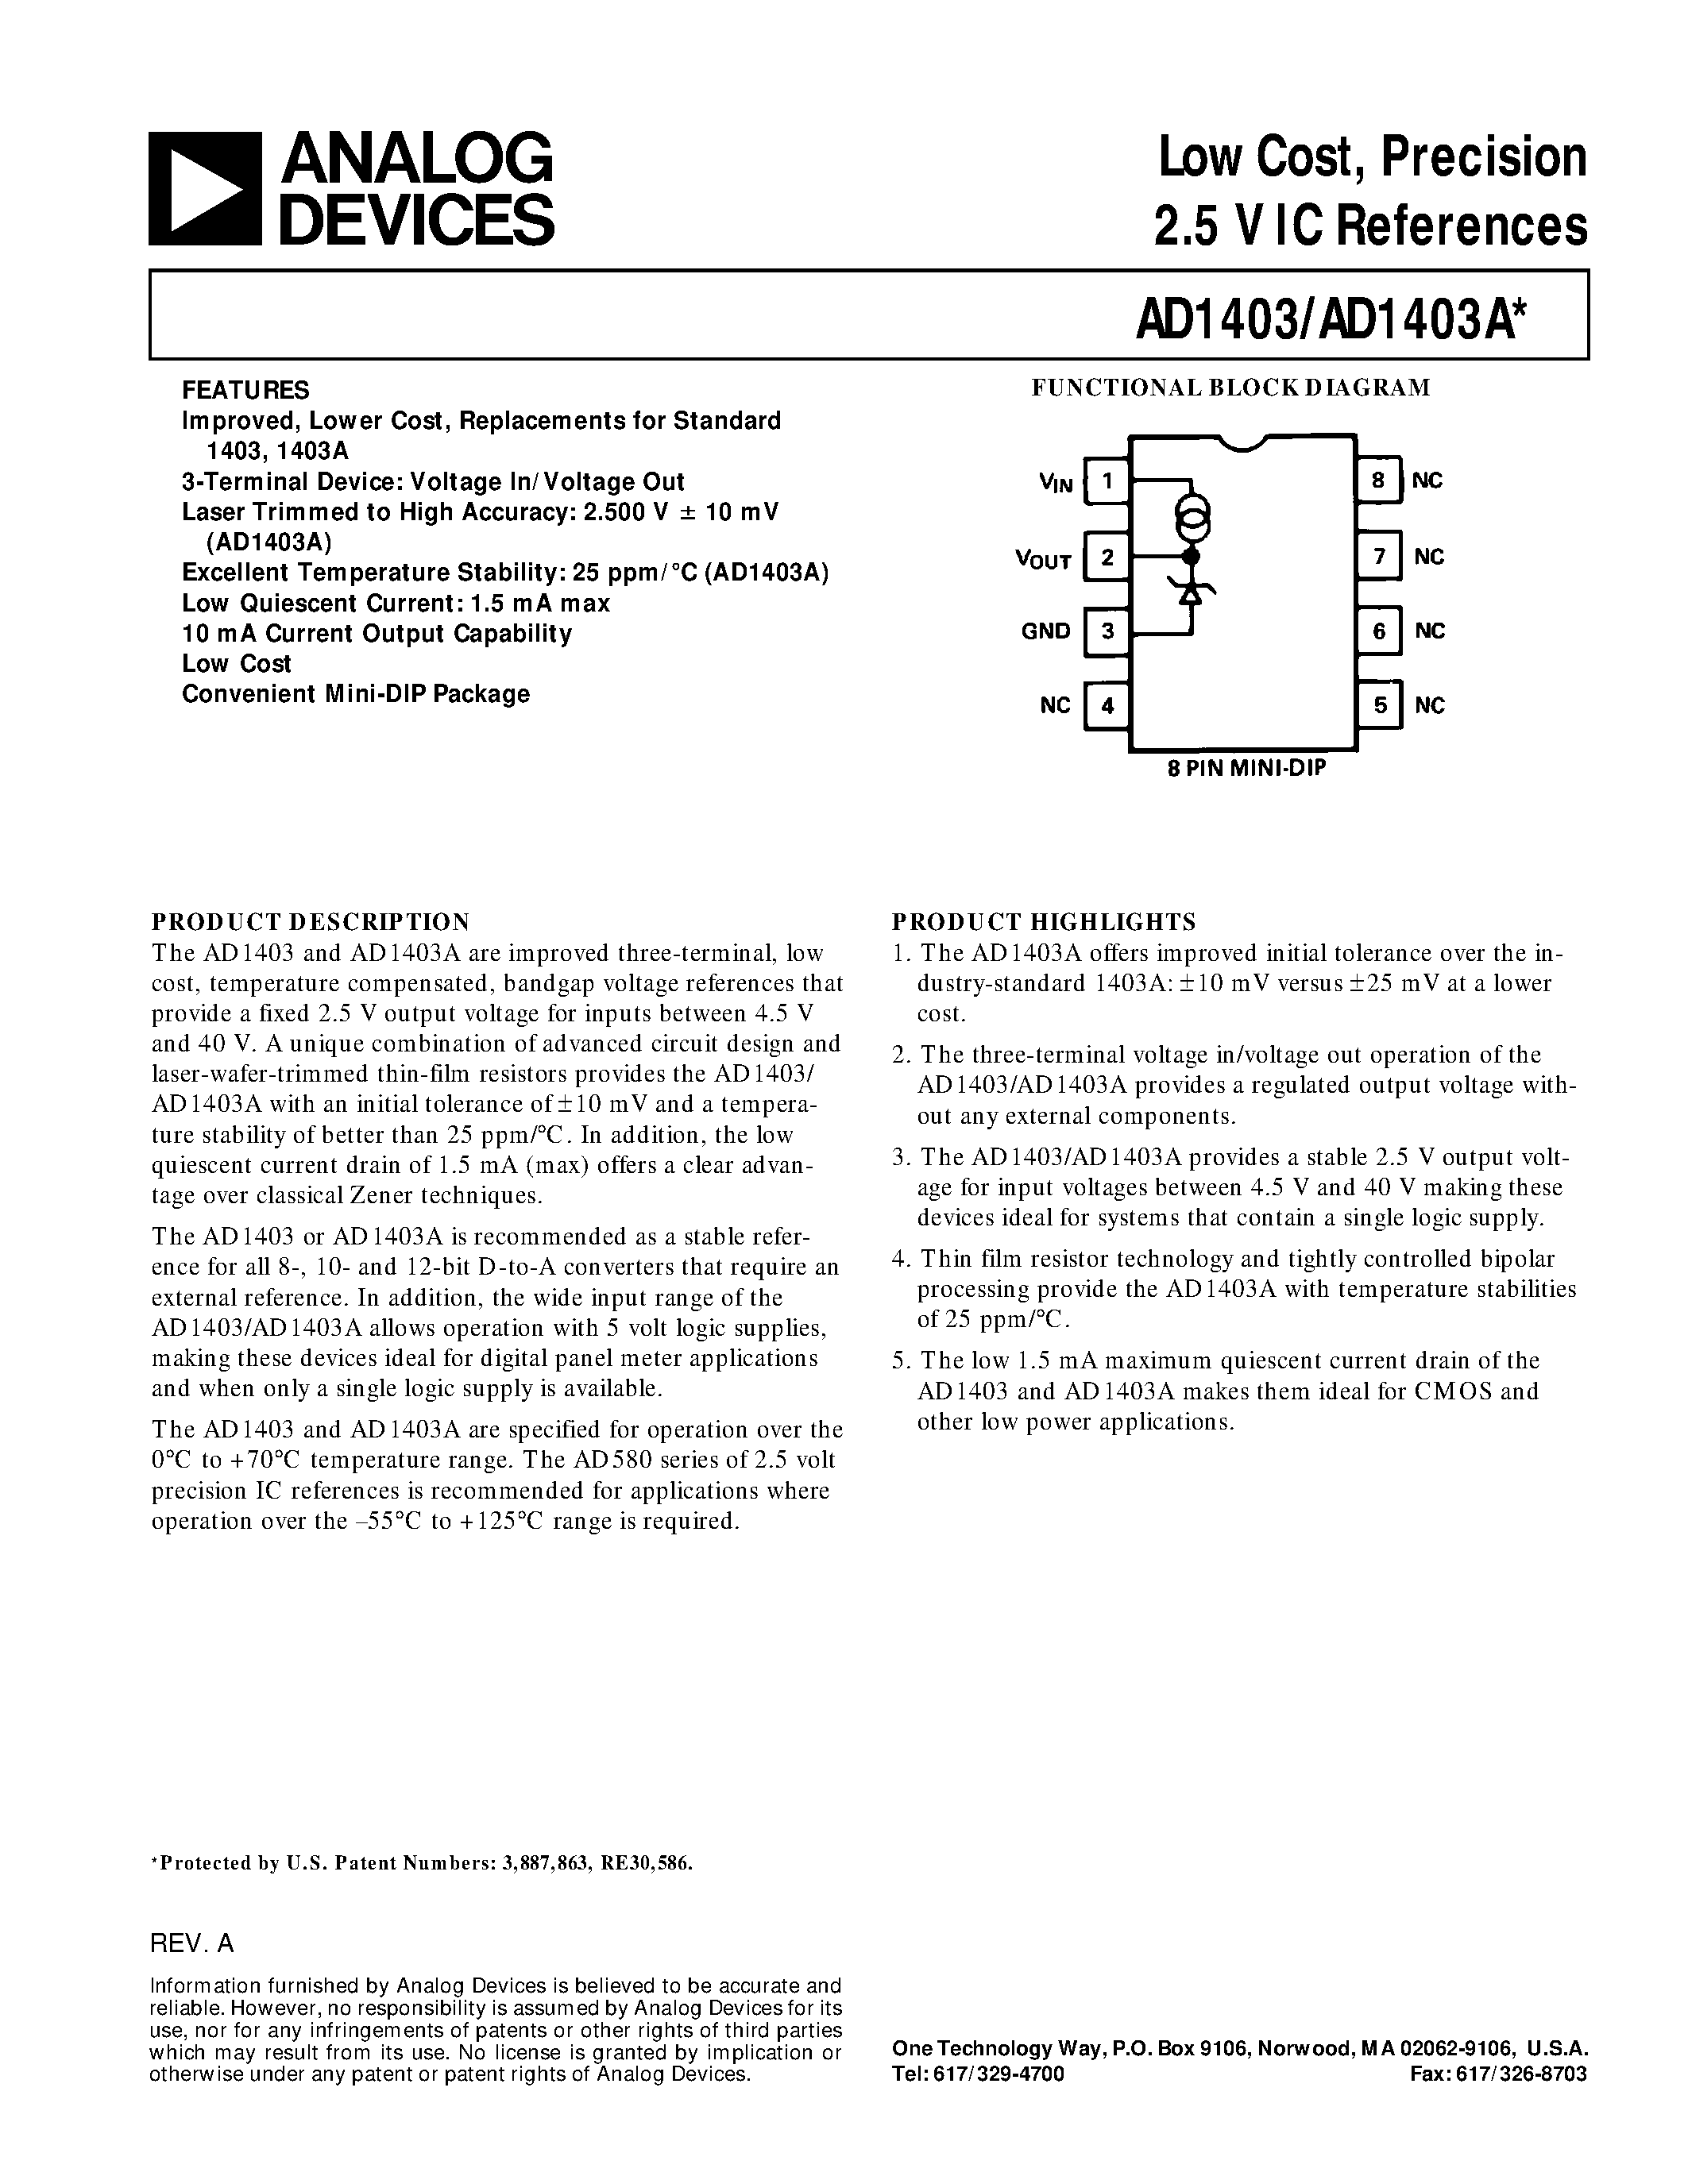 Datasheet AD1403A - Low Cost/ Precision 2.5 V IC References page 1